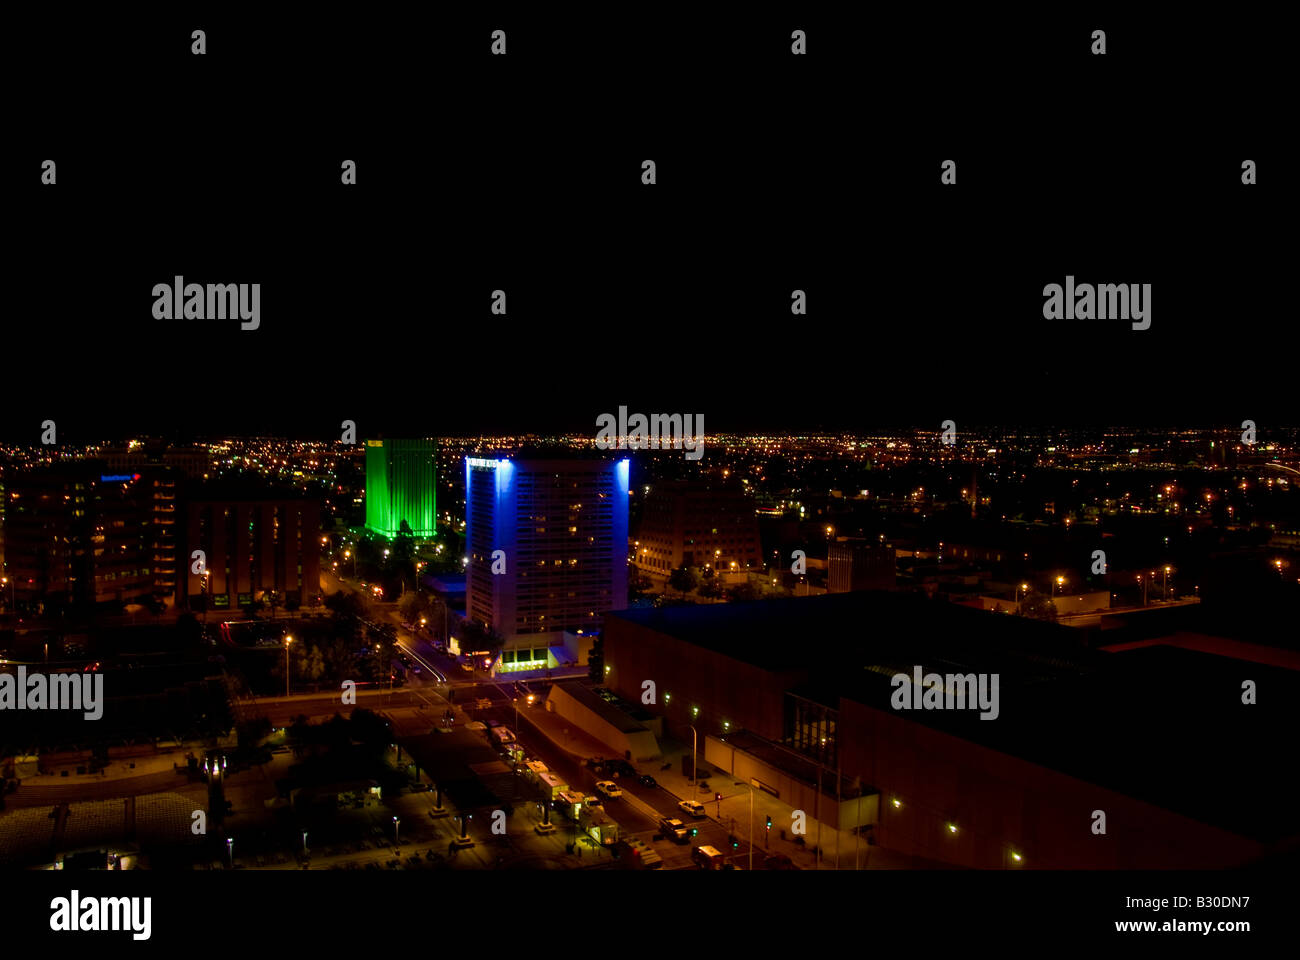 The Wells Fargo bank and Doubletree hotel lit up at night at Downtown Albuquerque Stock Photo